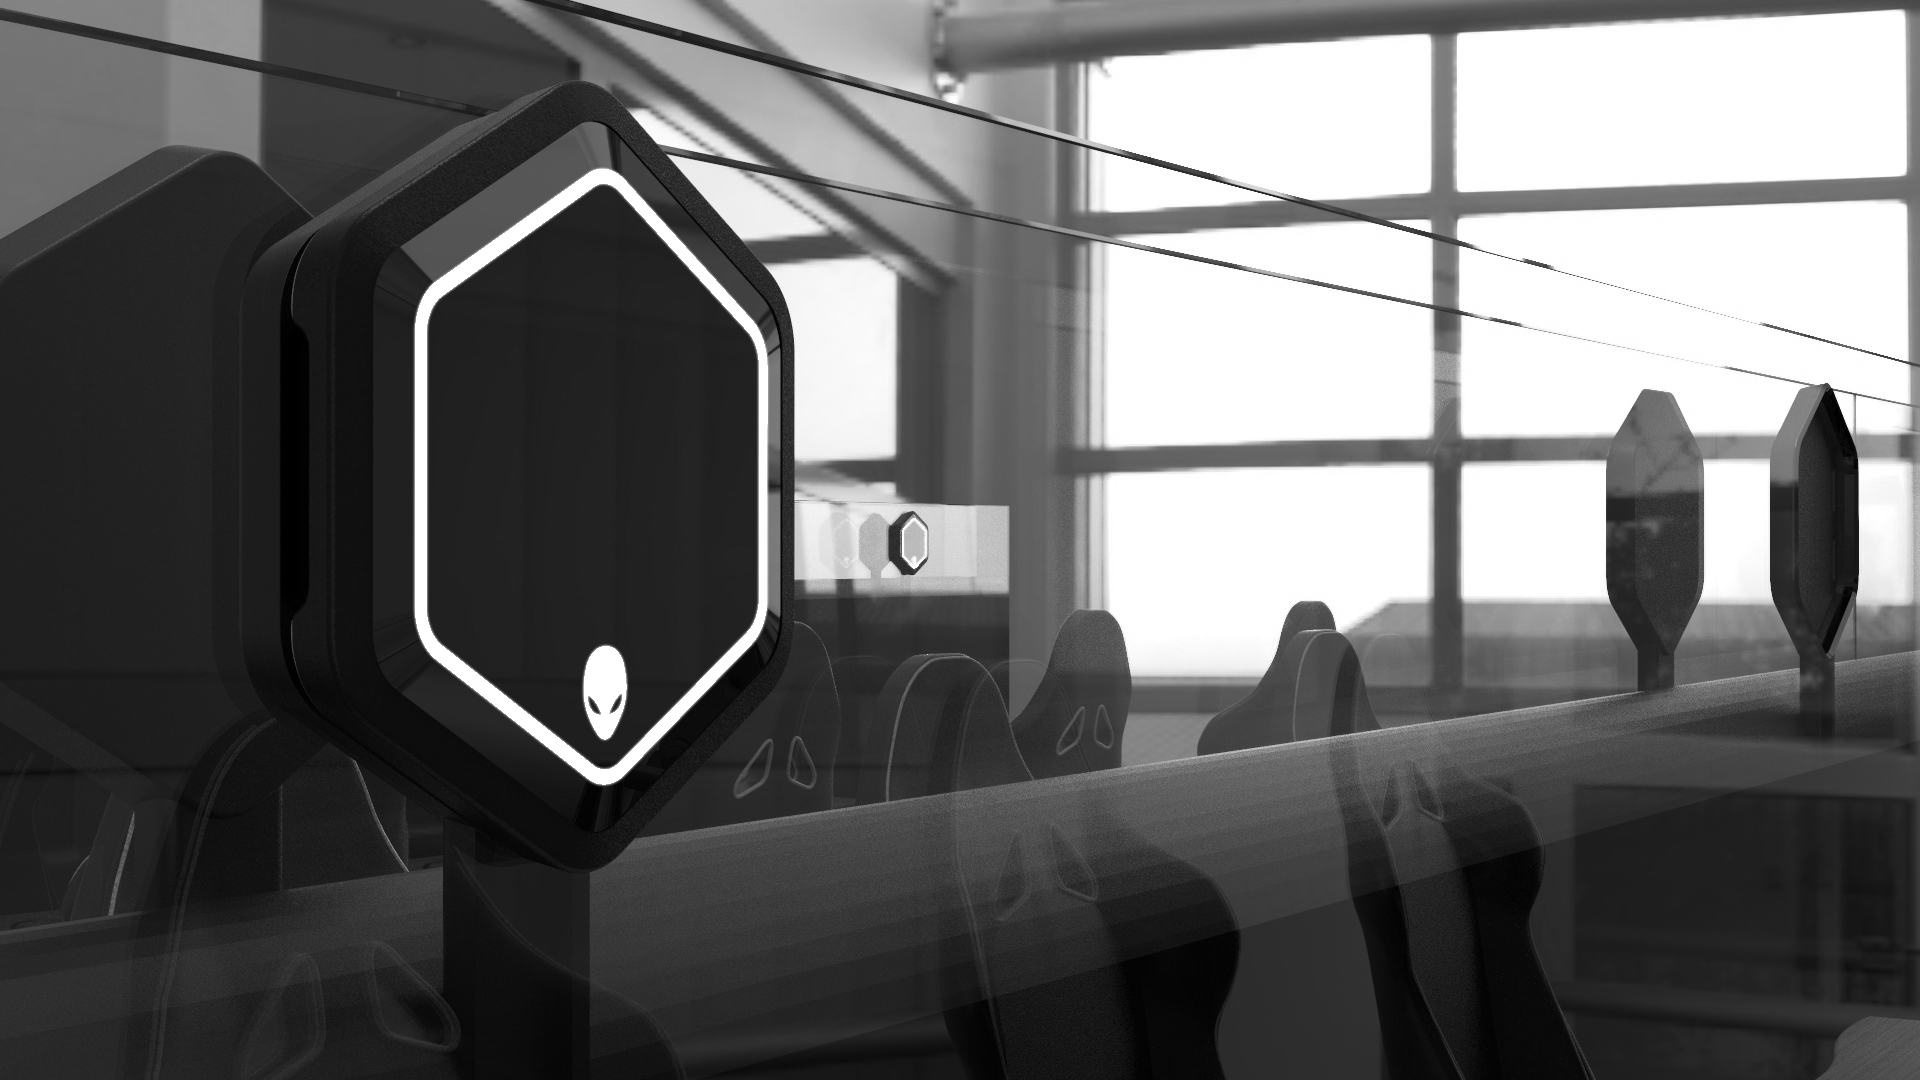 final intern project created for alienware brand college esports